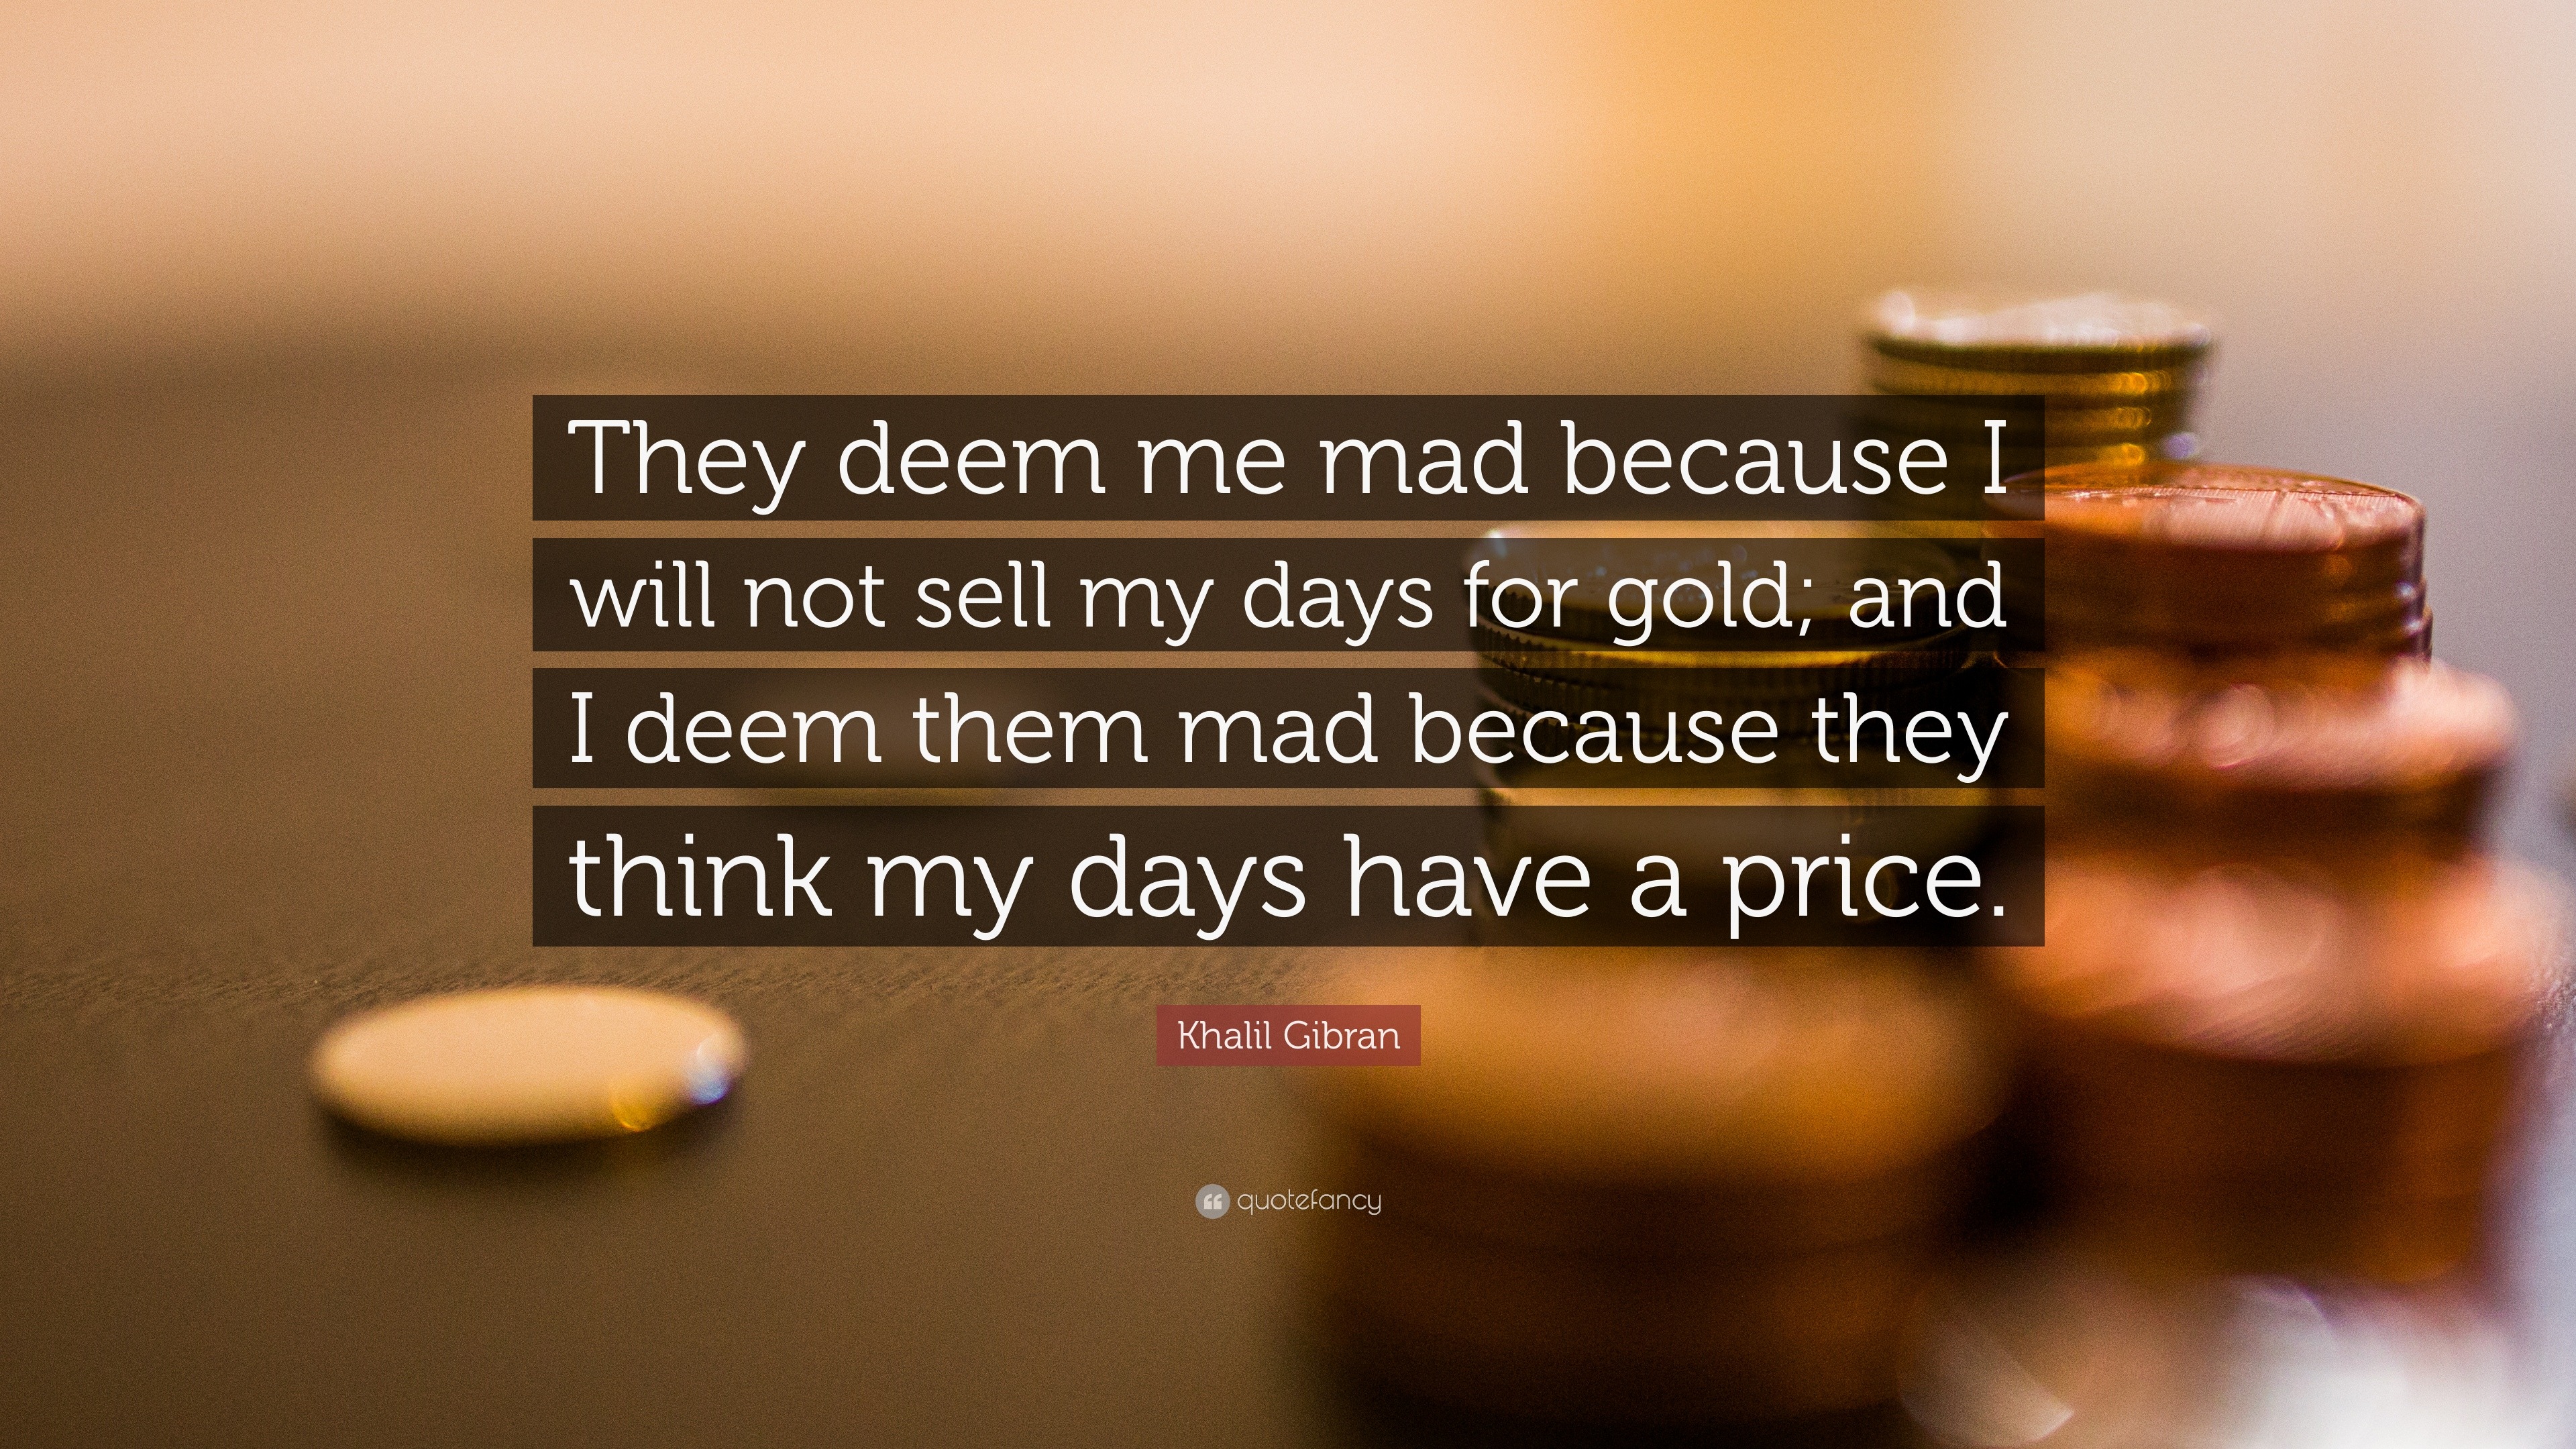 Quotes About Money “They deem me mad because I will not sell my days